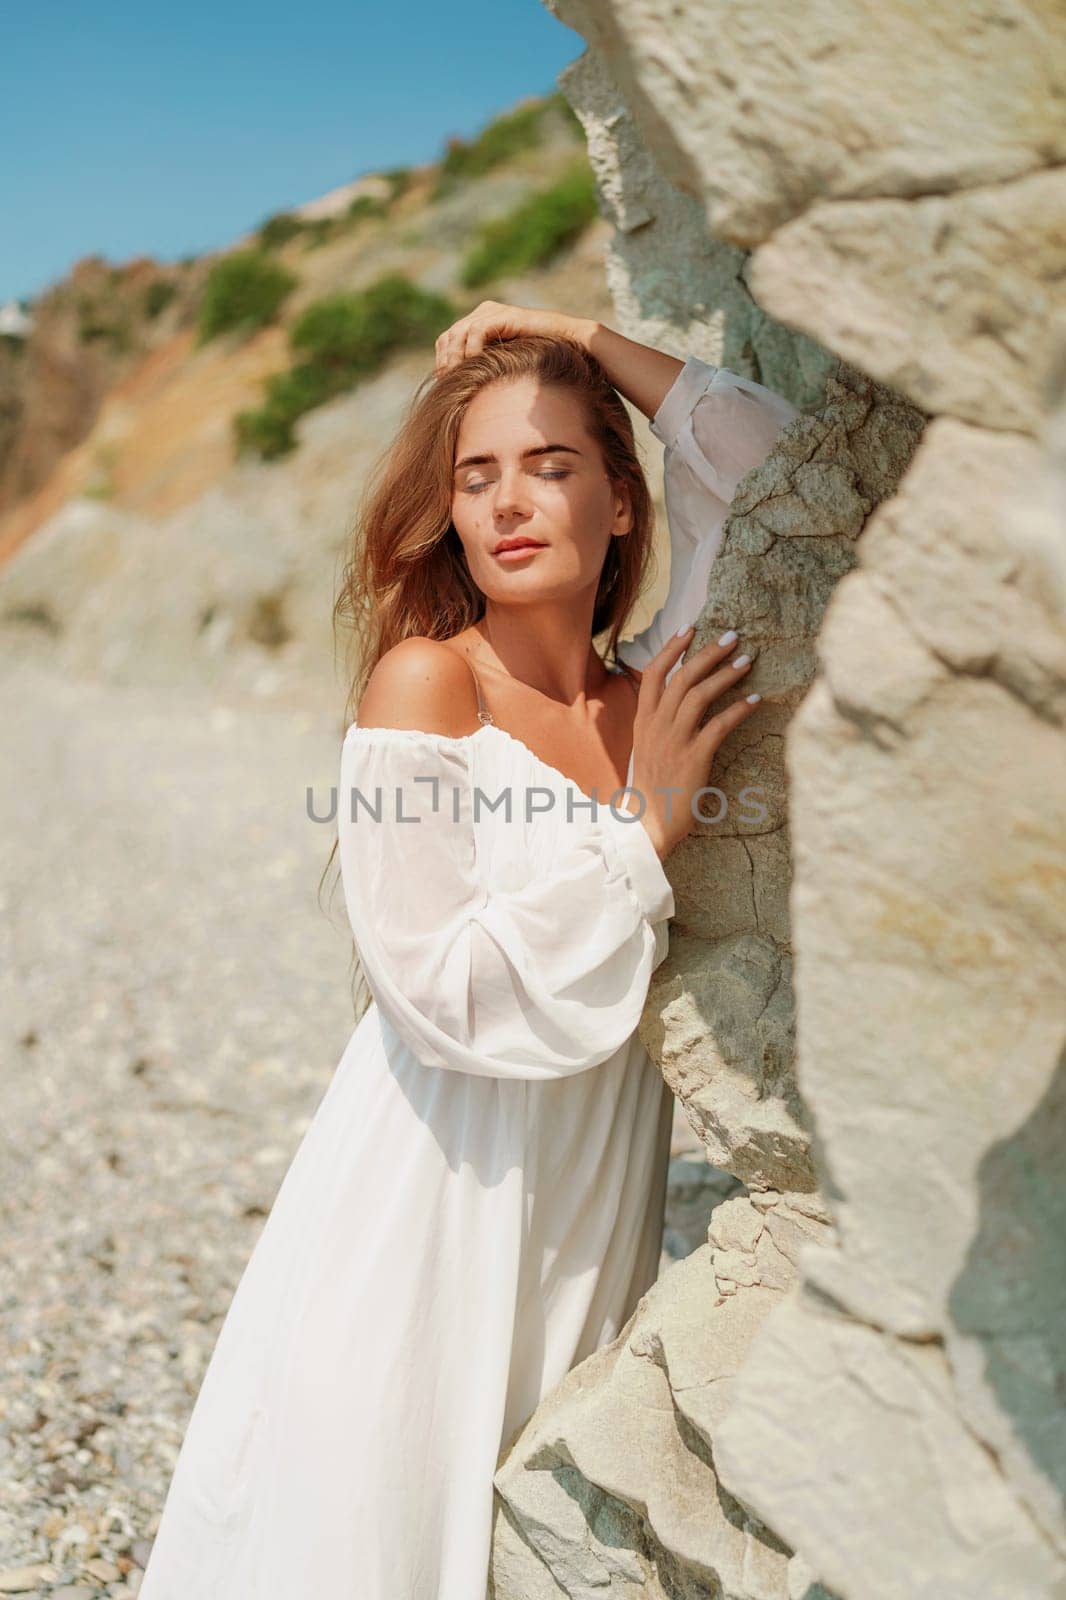 A woman in a white dress is standing on a rocky beach. Concept of serenity and tranquility, as the woman is enjoying the natural beauty of the beach. by Matiunina